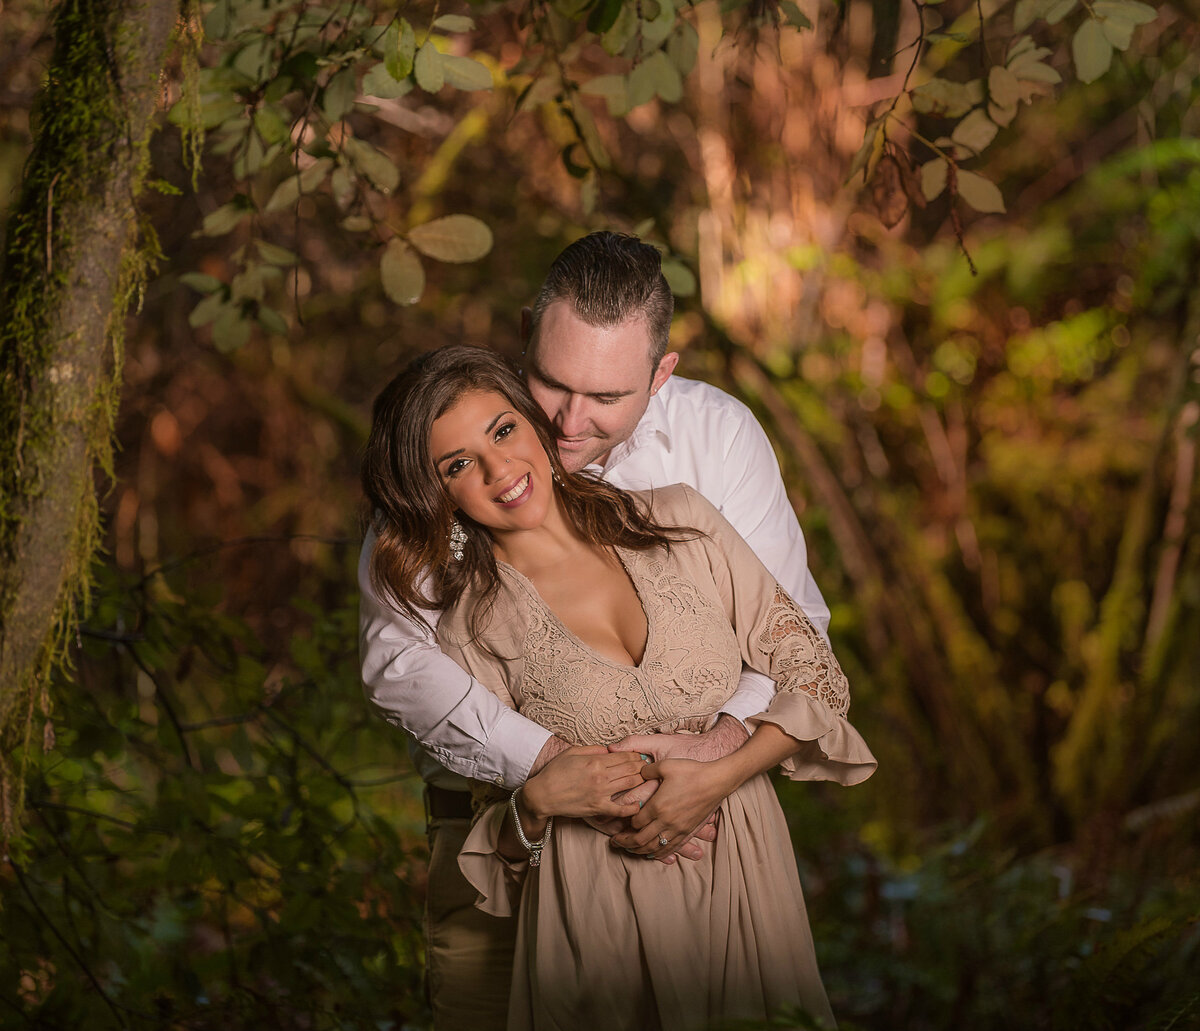 Redway-California-engagement-photographer-Parky's-Pics-Photography-Humboldt-County-redwoods-Avenue-of-the-Giants-engagement-1.jpg